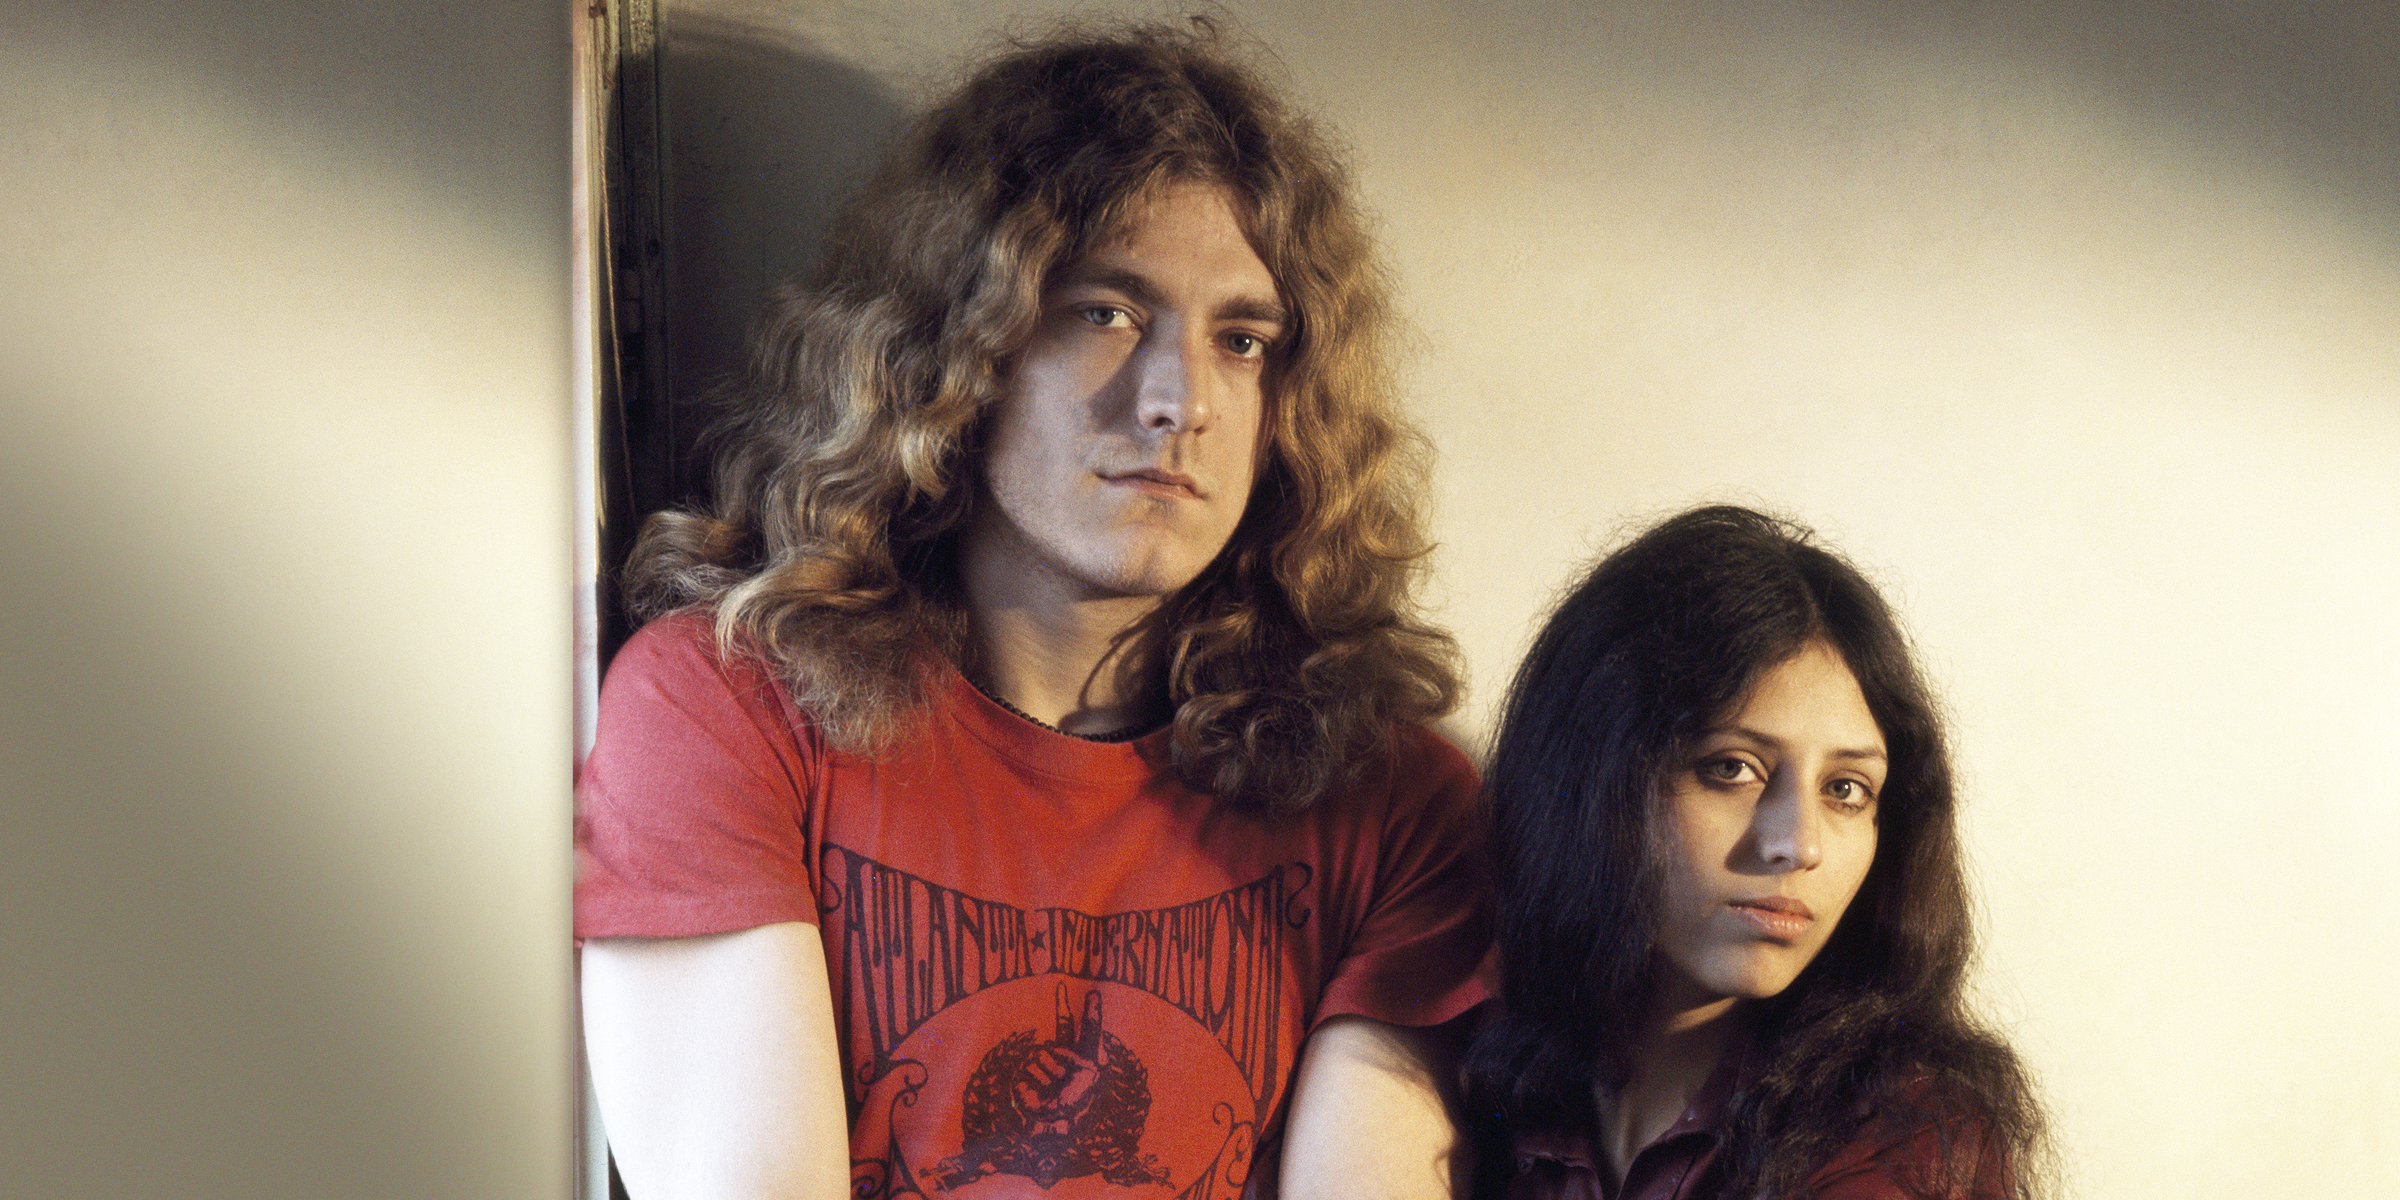 Robert Plant and Maureen Wilson | Source: Getty Images